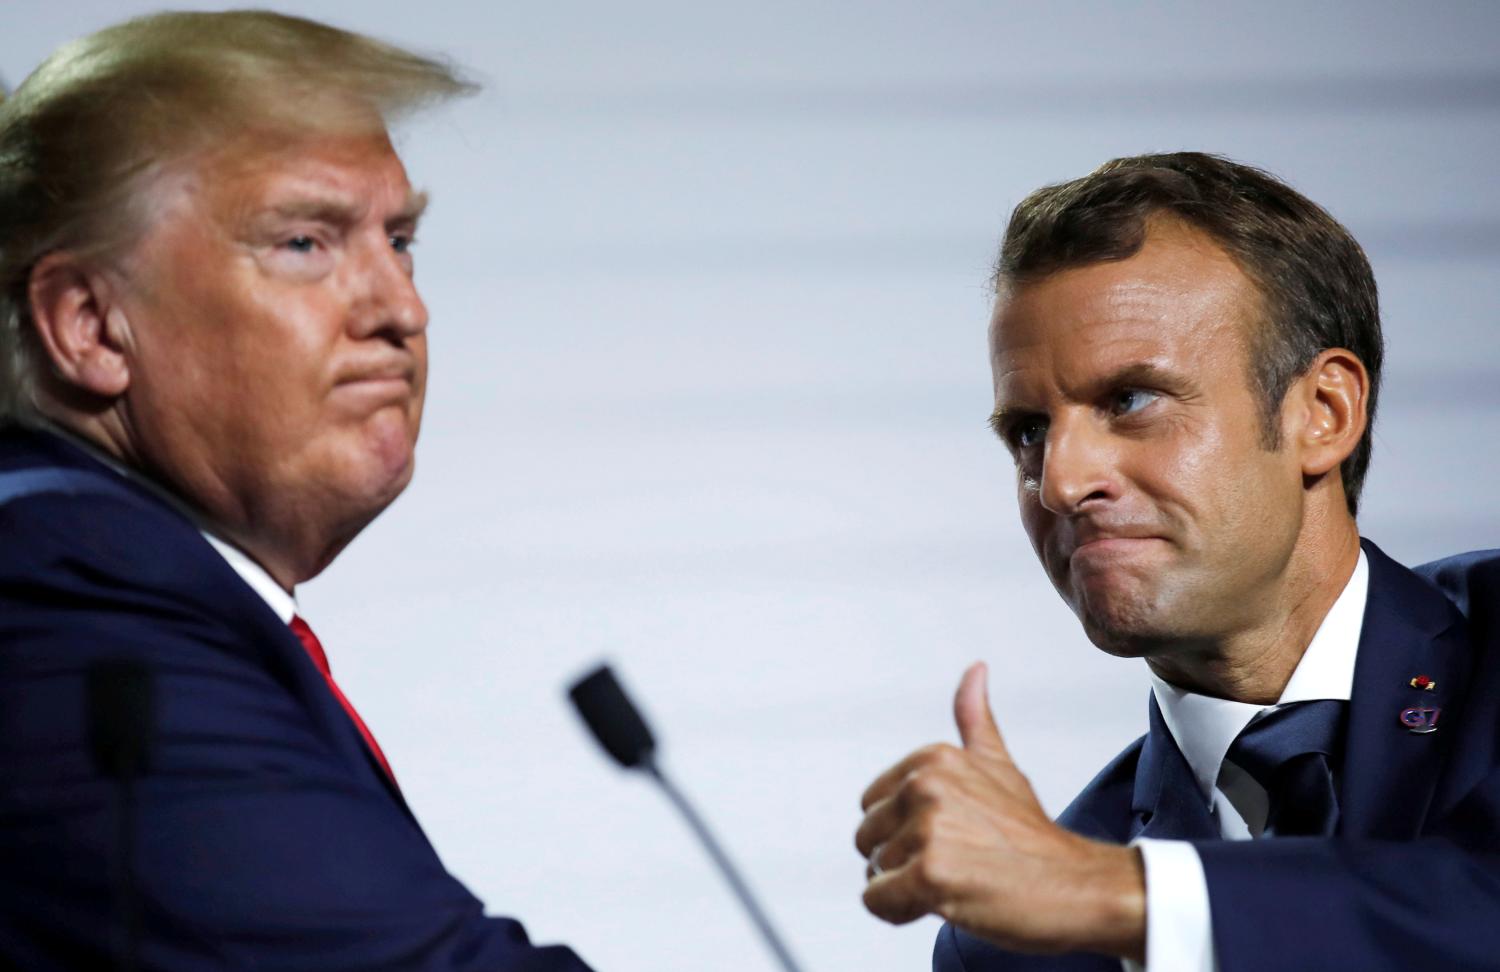 French President Emmanuel Macron and U.S. President Donald Trump react during a news conference at the end of the G7 summit in Biarritz, France, August 26, 2019. REUTERS/Carlos Barria     TPX IMAGES OF THE DAY - RC19EBF26190